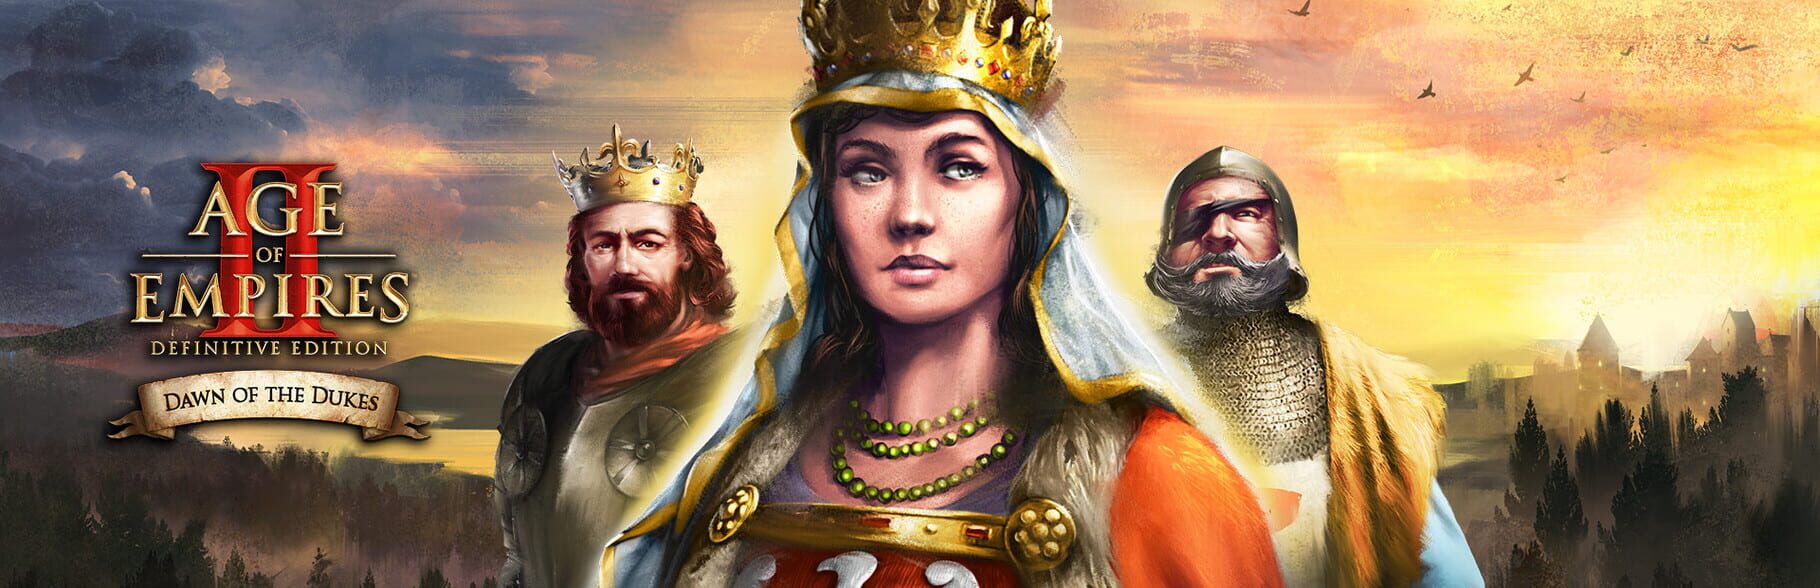 Arte - Age of Empires II: Definitive Edition - Dawn of the Dukes